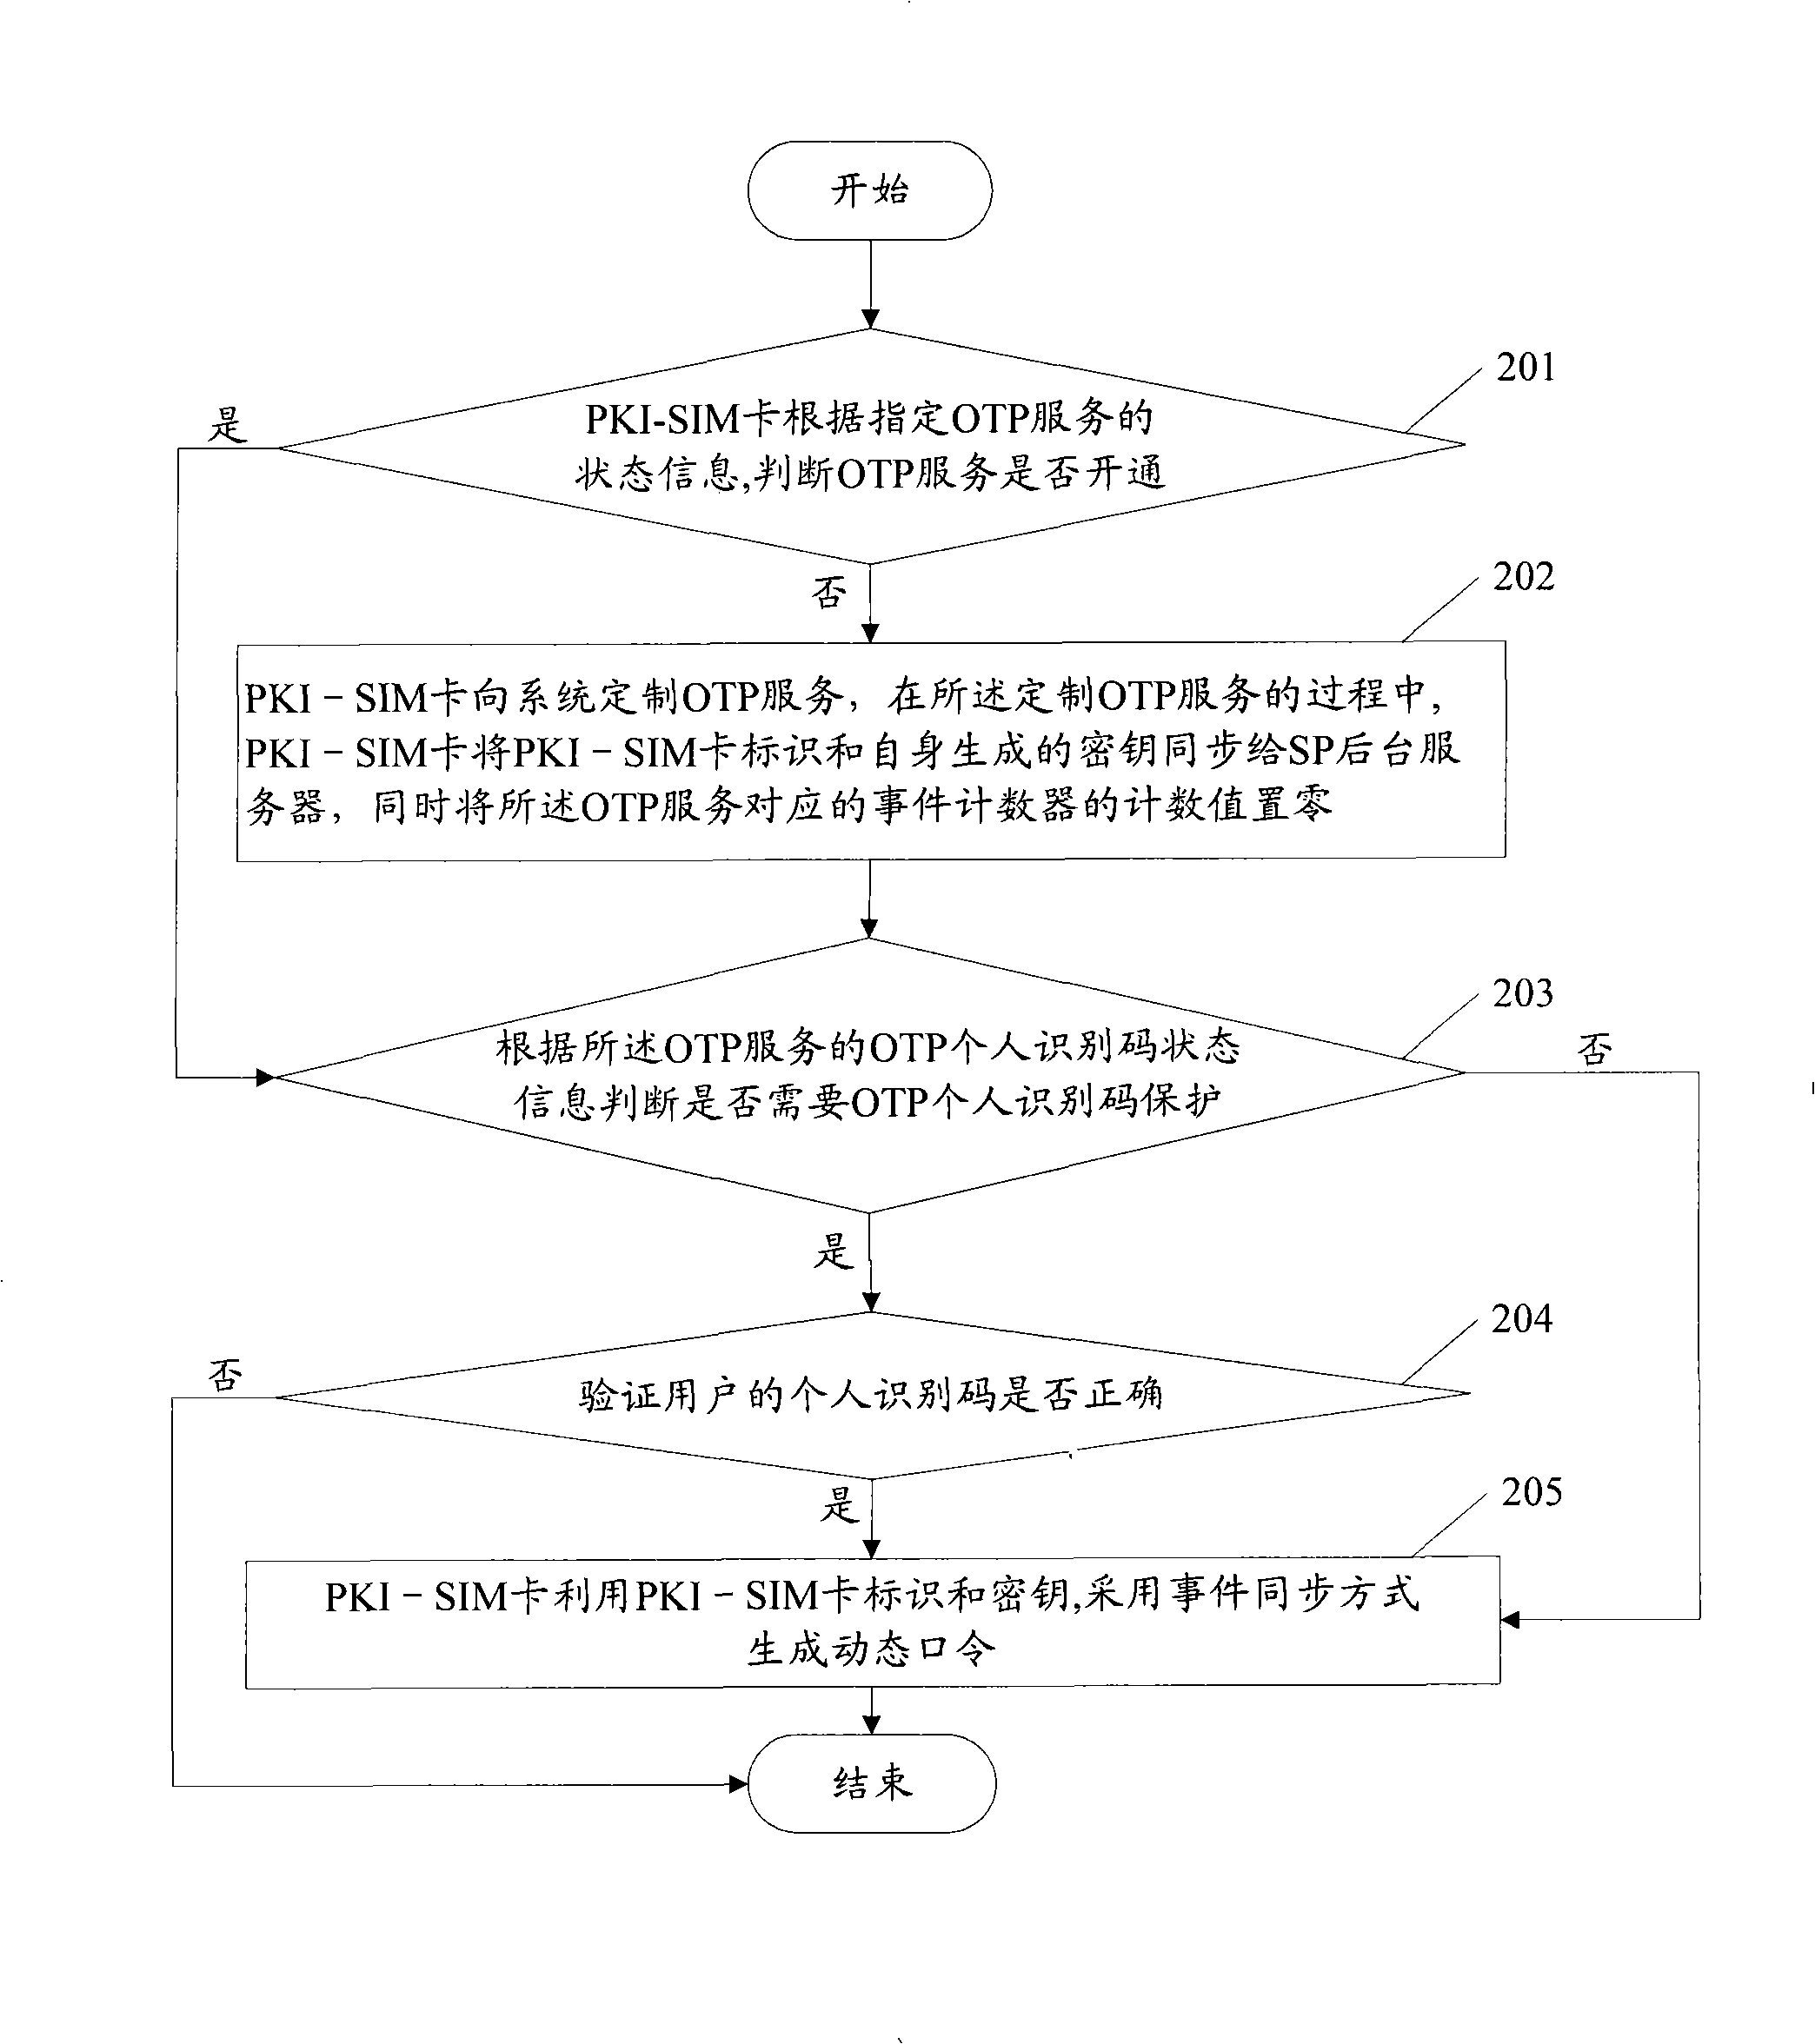 Method for acquiring dynamic password based on public key architecture-user personal identification card